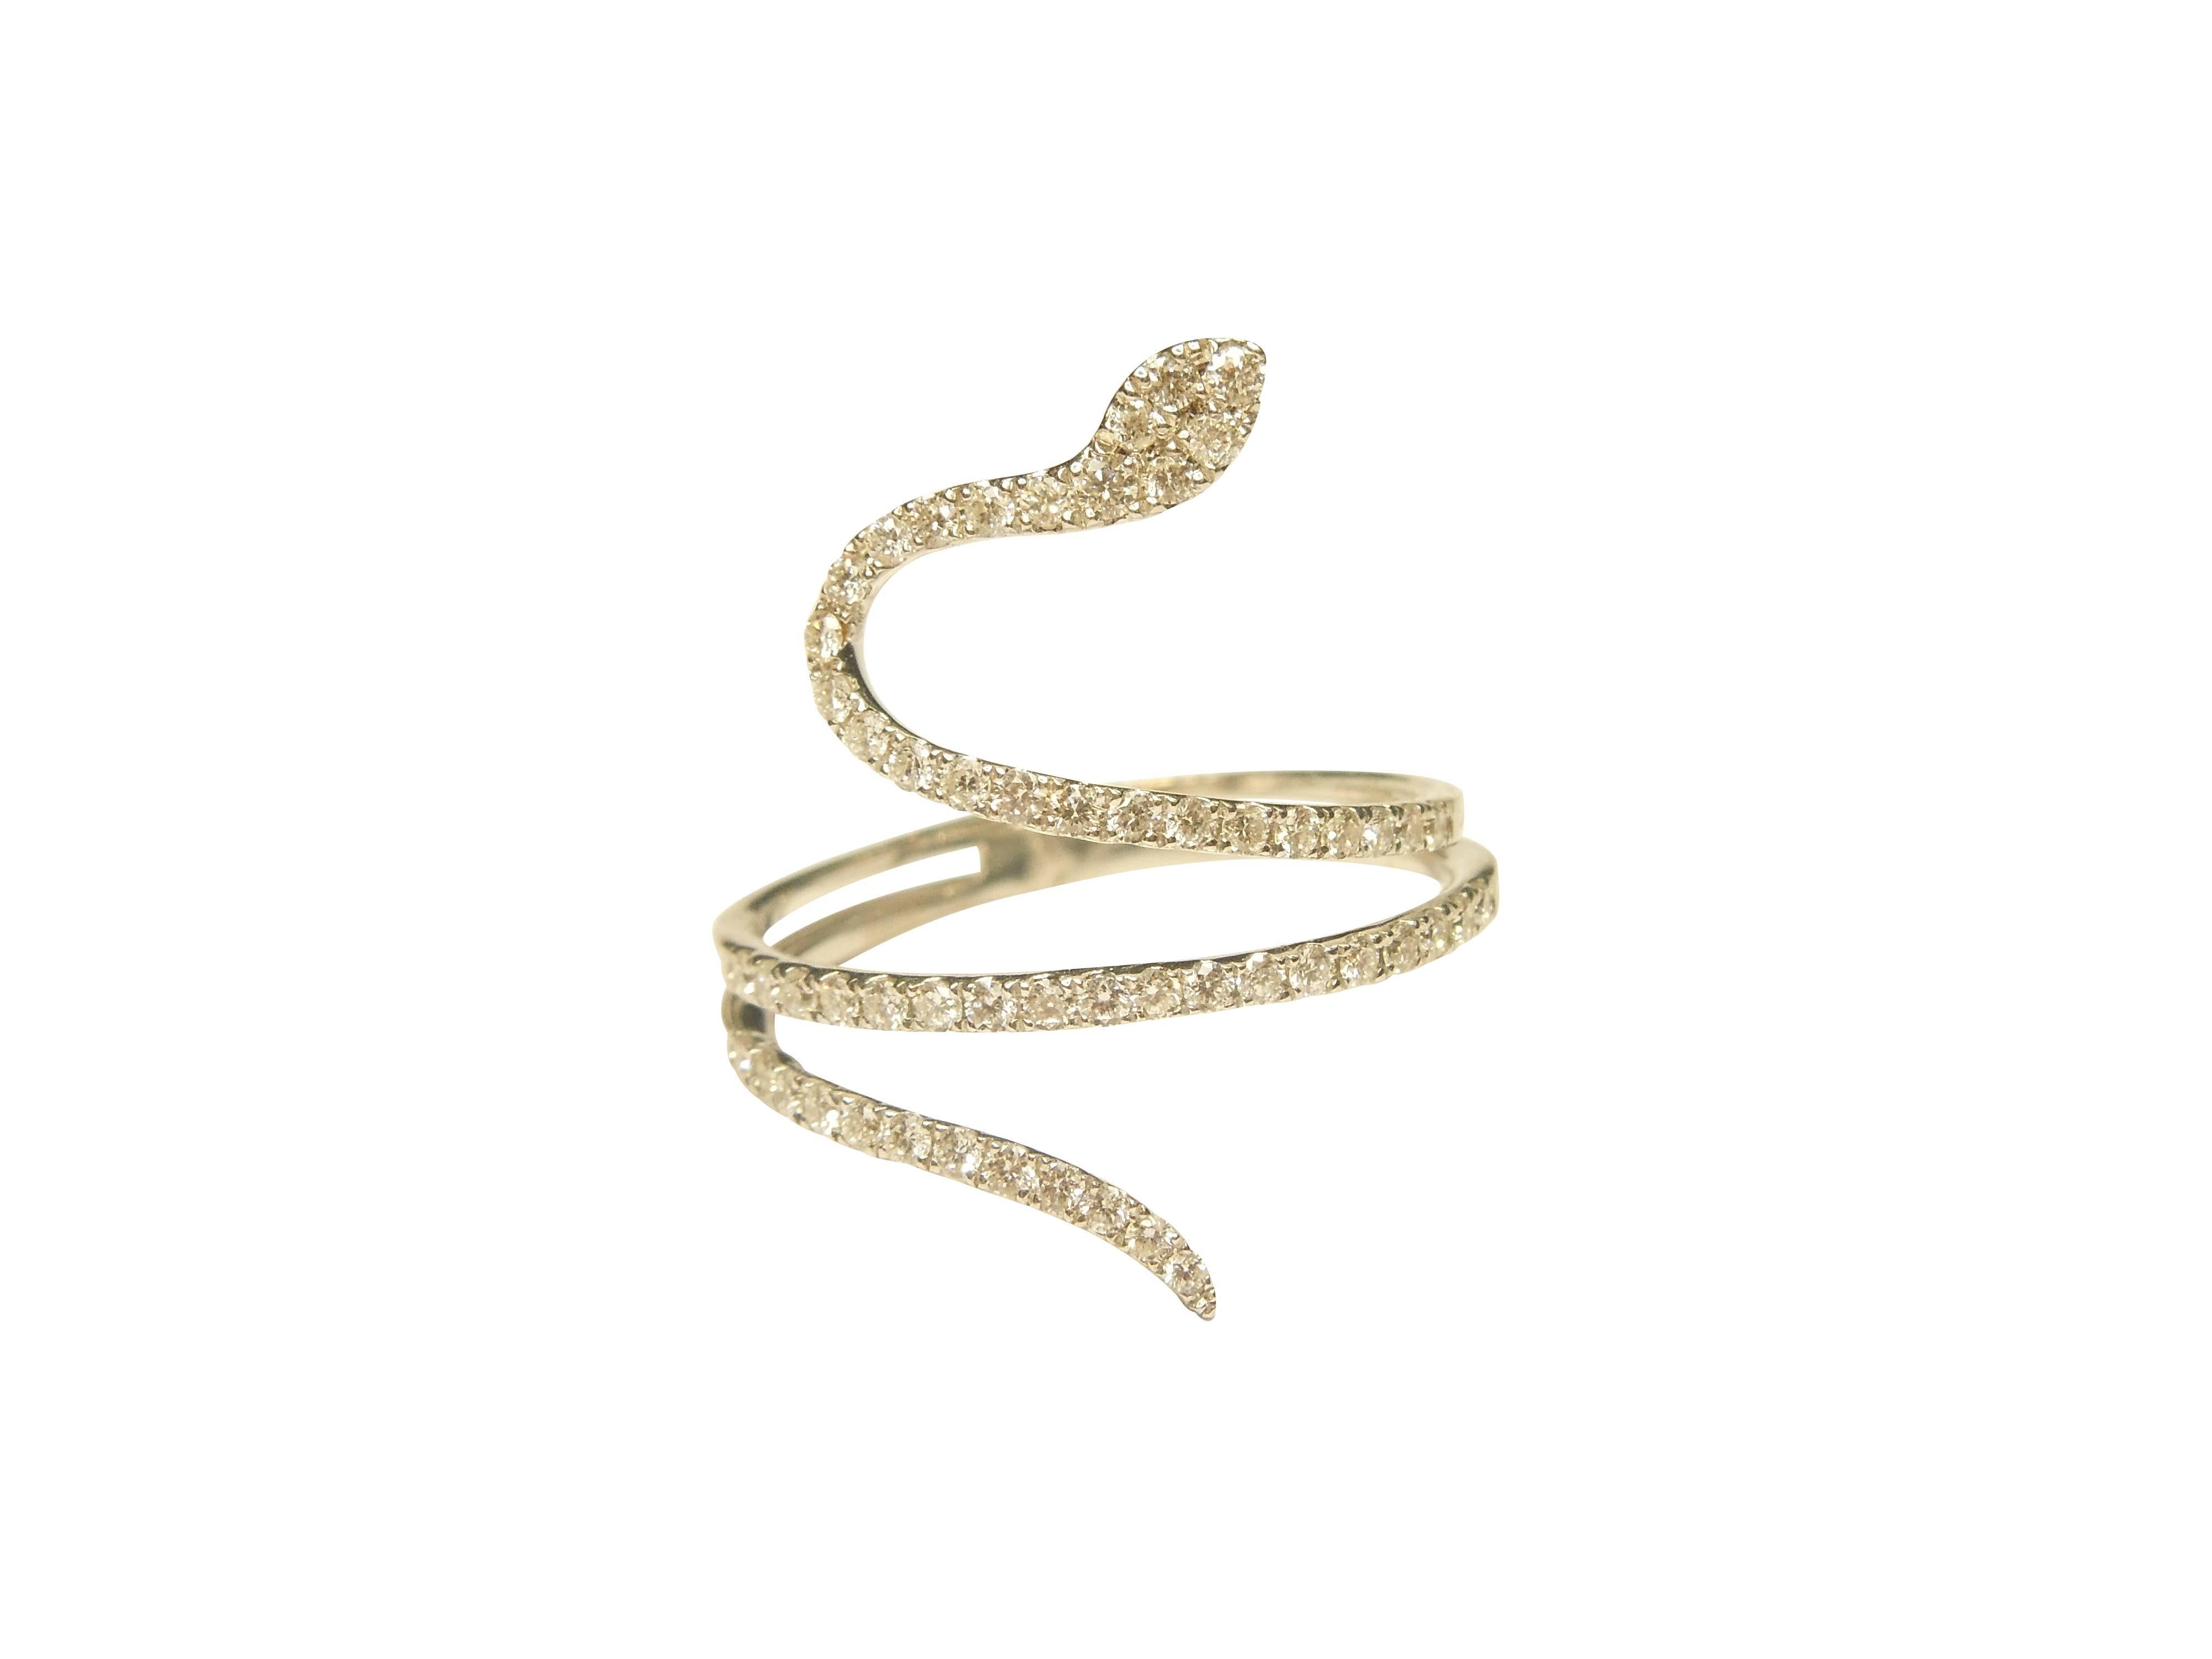 18K Gold Snake Ring with Diamonds

Snake wraps around finger at 0.95 inches length

0.70ct. Diamonds cover face of ring

Currently size 8. Can be sized.

2.60 grams 18k gold